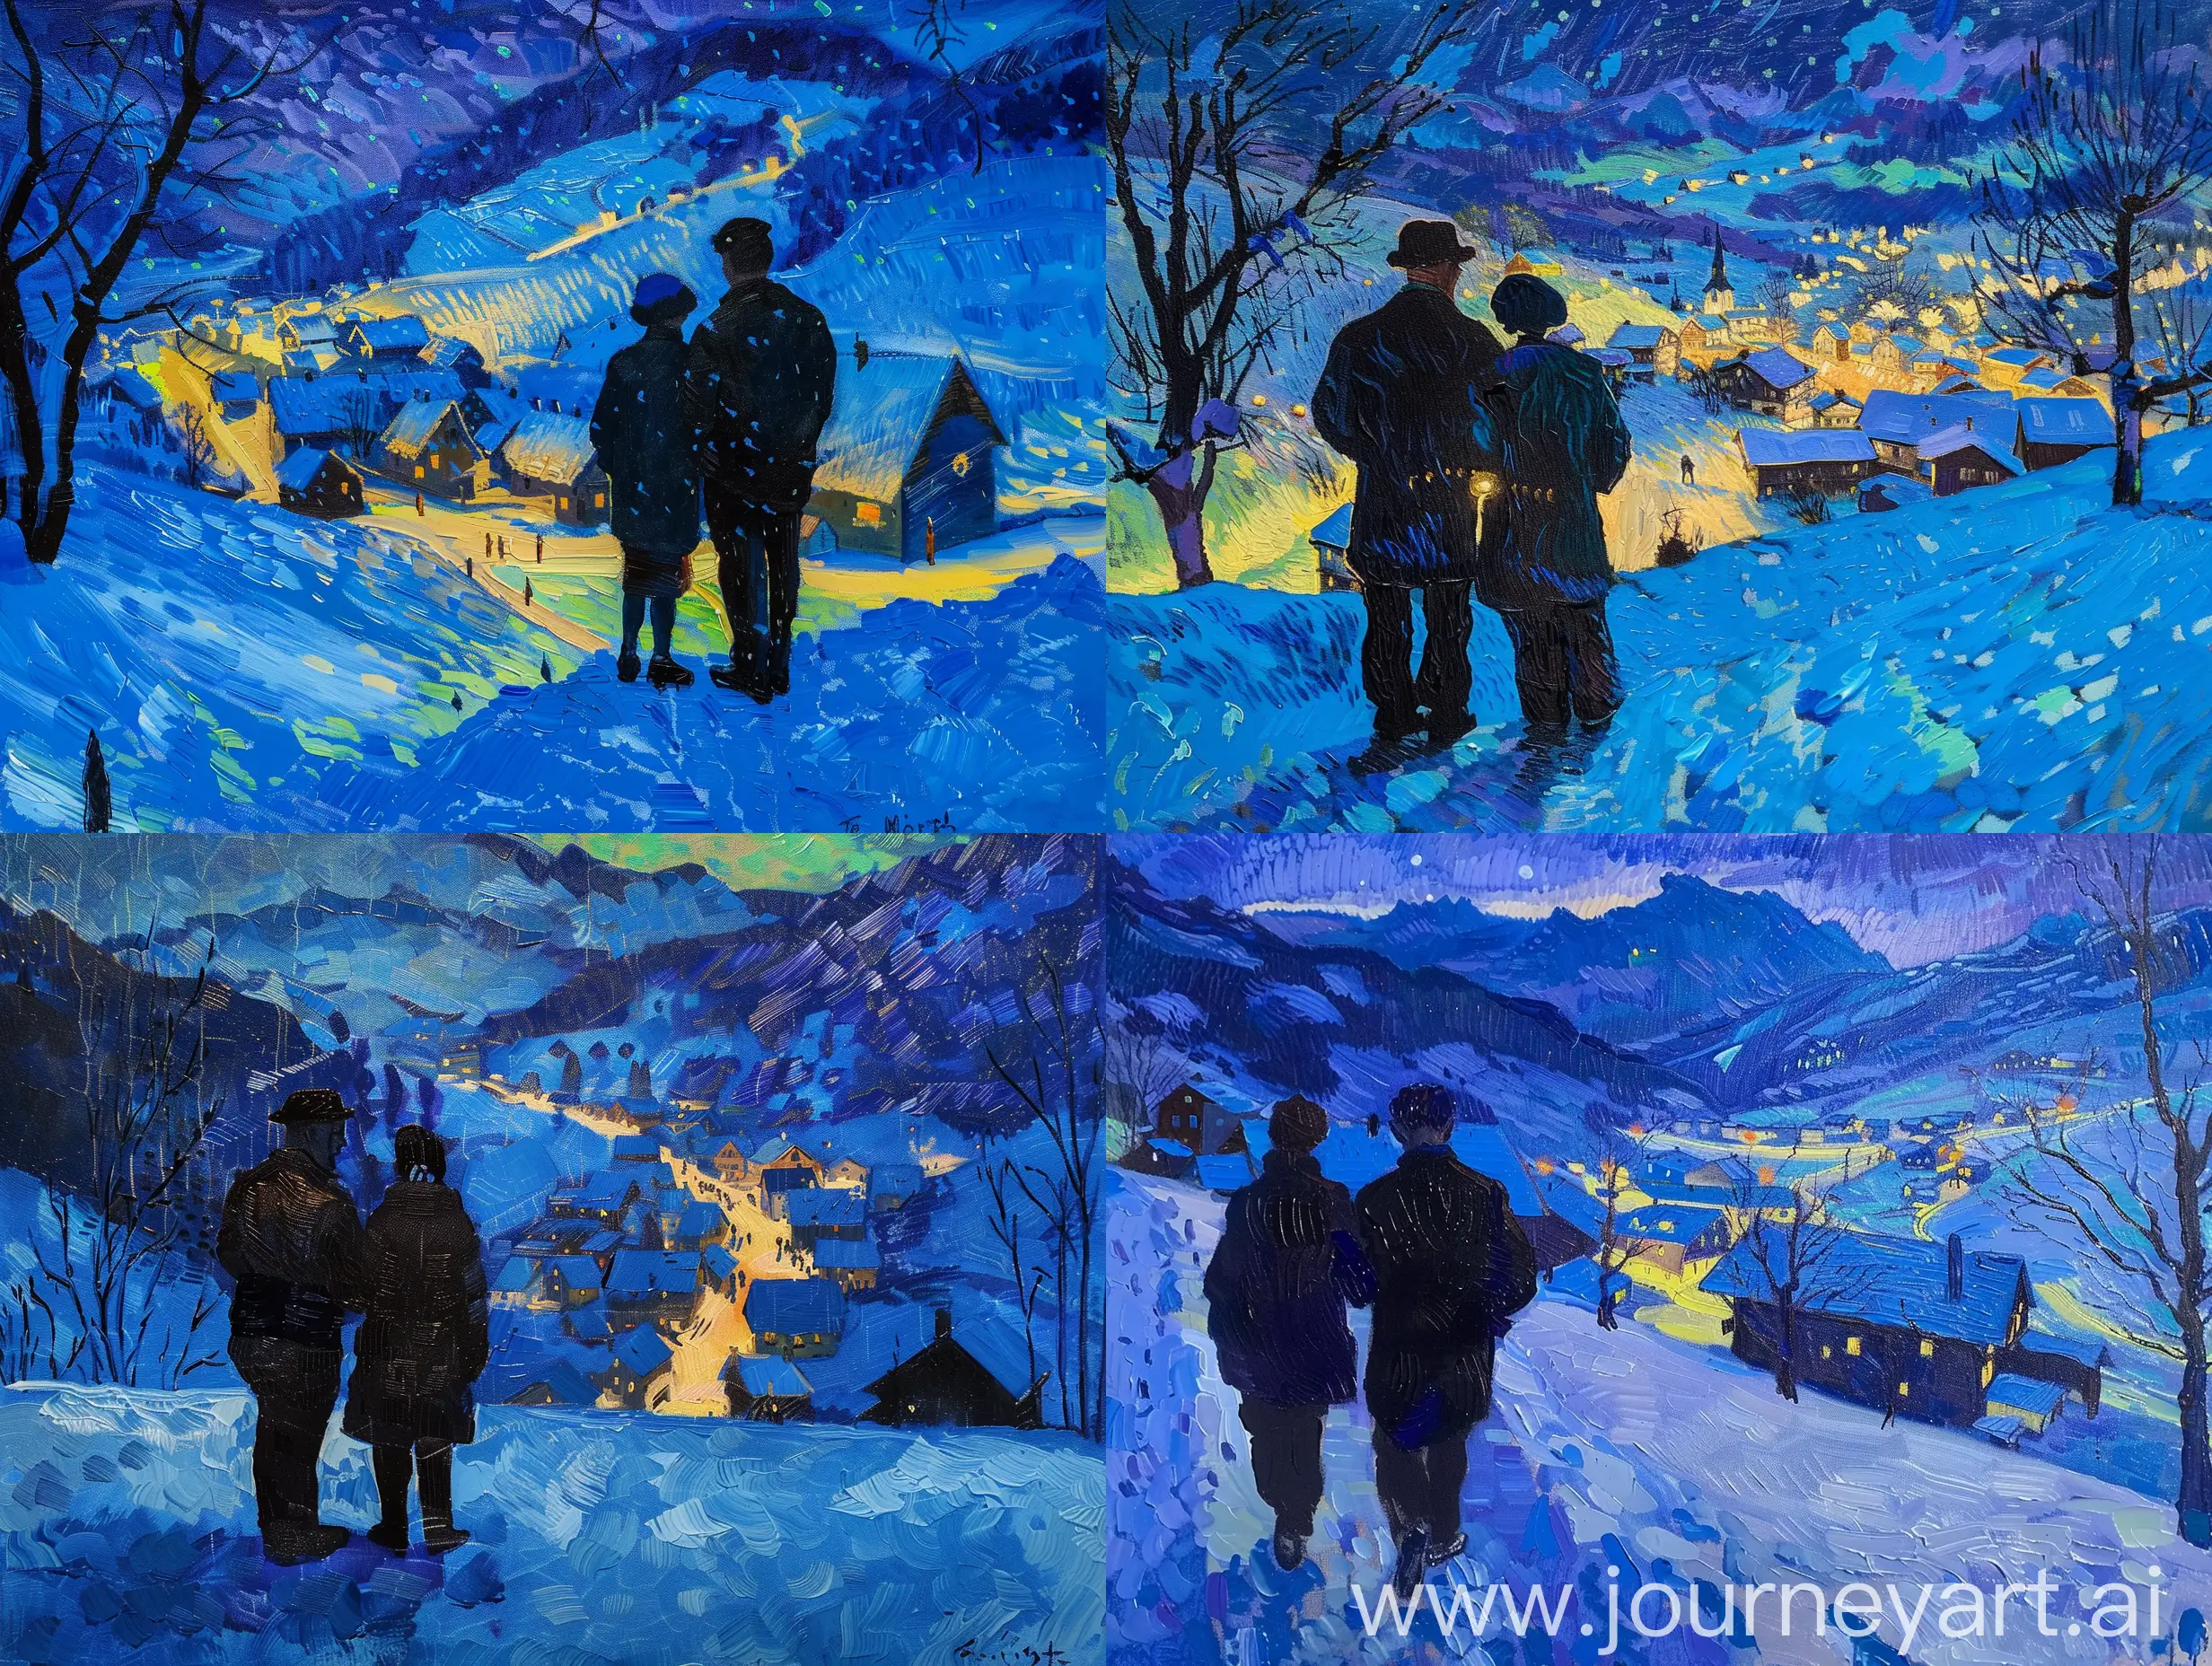 oil painting features a post-impressionist style reminiscent of Vincent van Gogh, with bold brushstrokes and vibrant colors. It portrays two silhouetted figures, in a snowy landscape at night, overlooking a village illuminated by warm yellow lights. The contrast between the cold blue tones of the snow and the cozy warmth of the village creates a captivating scene that evokes a sense of stillness and the beauty of winter nights.